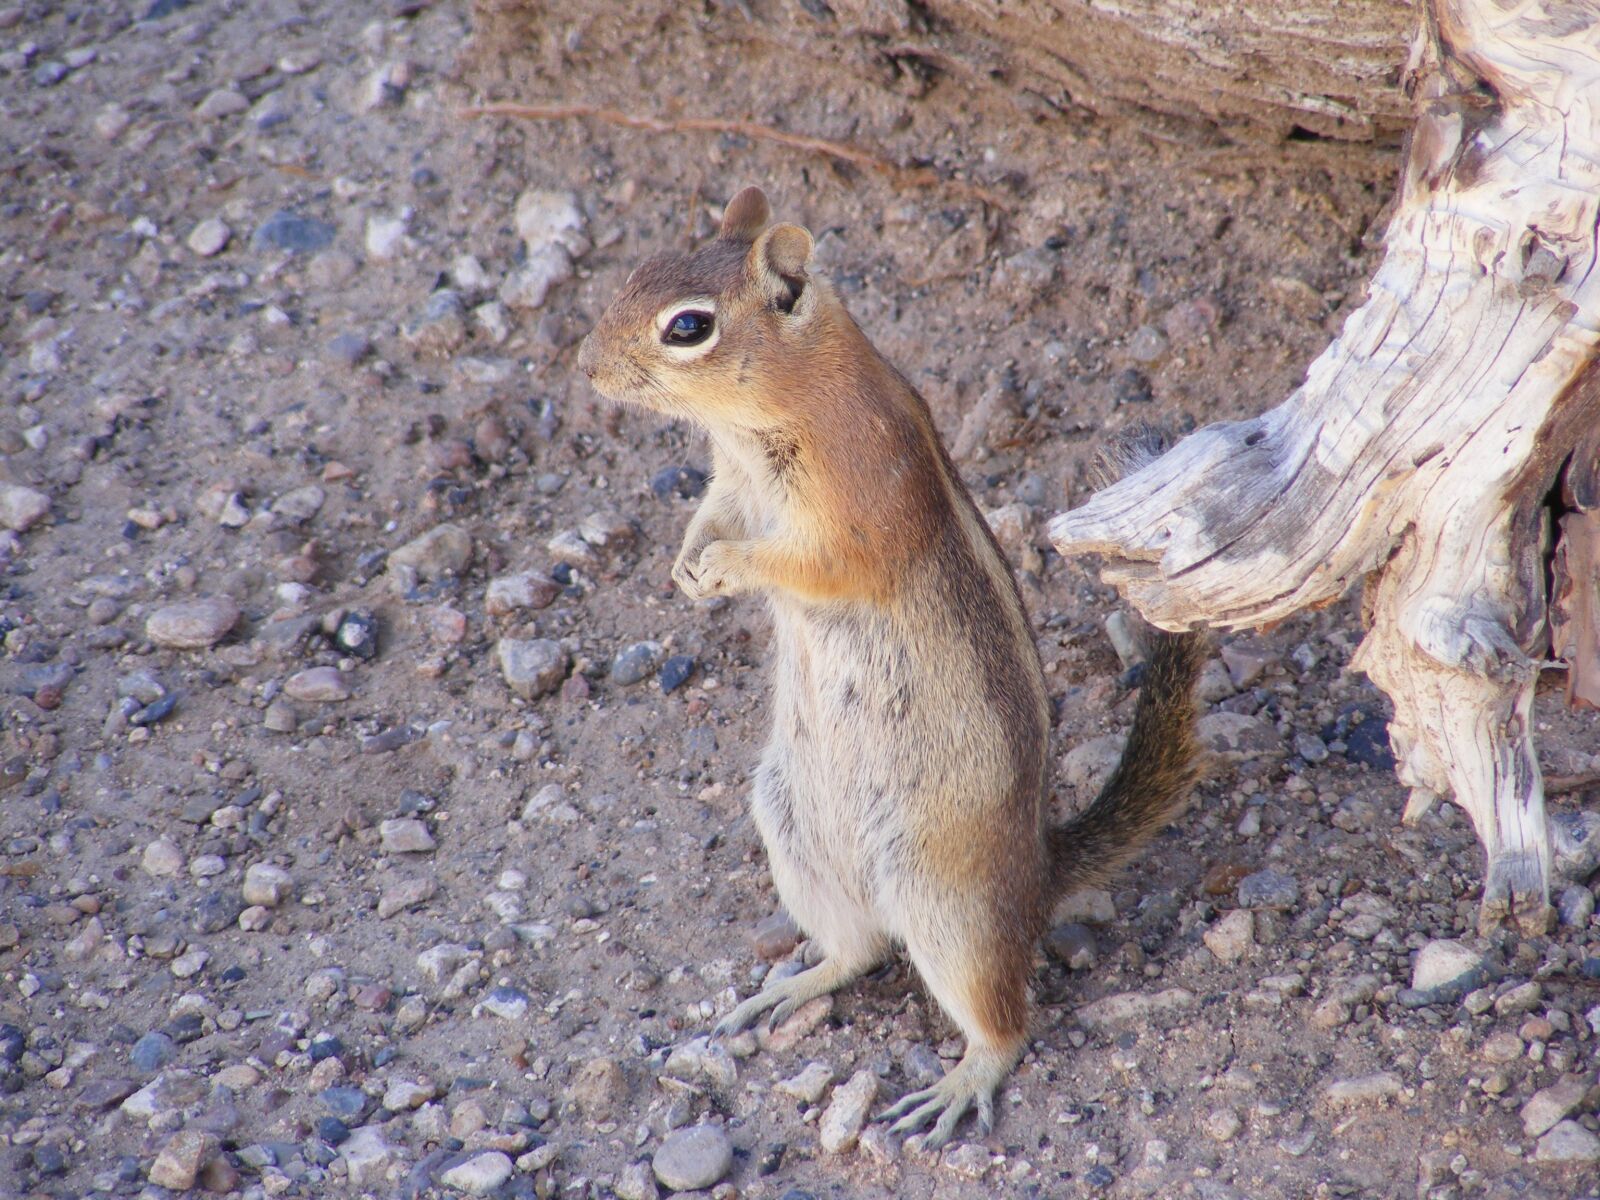 Fujifilm FinePix S5700 S700 sample photo. Ground squirrel, rodent, cute photography